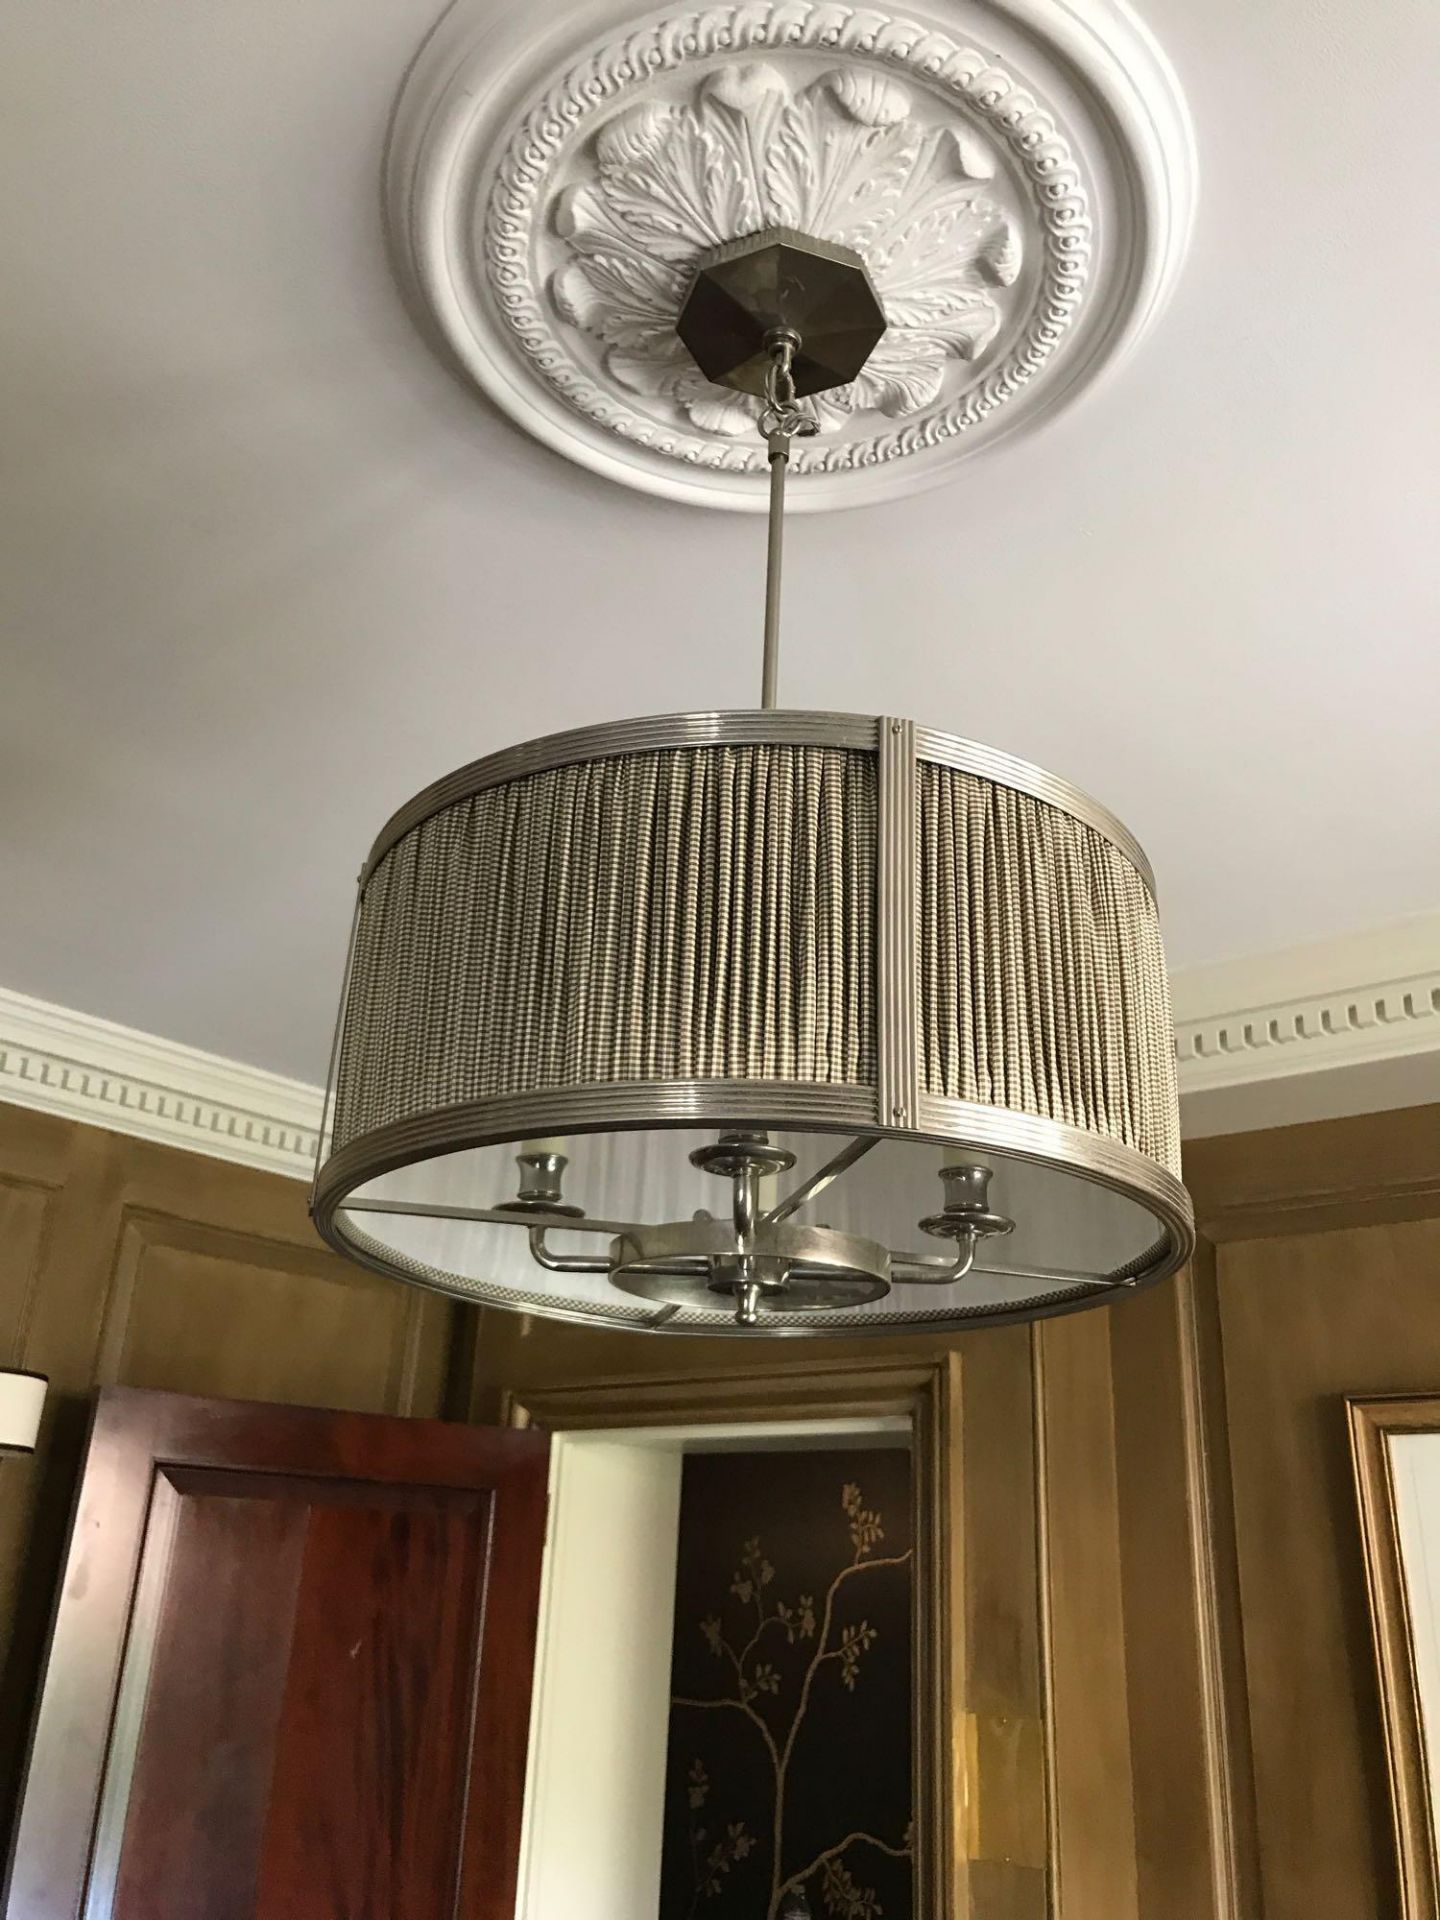 2 x Drum Style Pendant Steel Frame With Pleated Shade 53cm Diameter Room 611 - Image 2 of 2